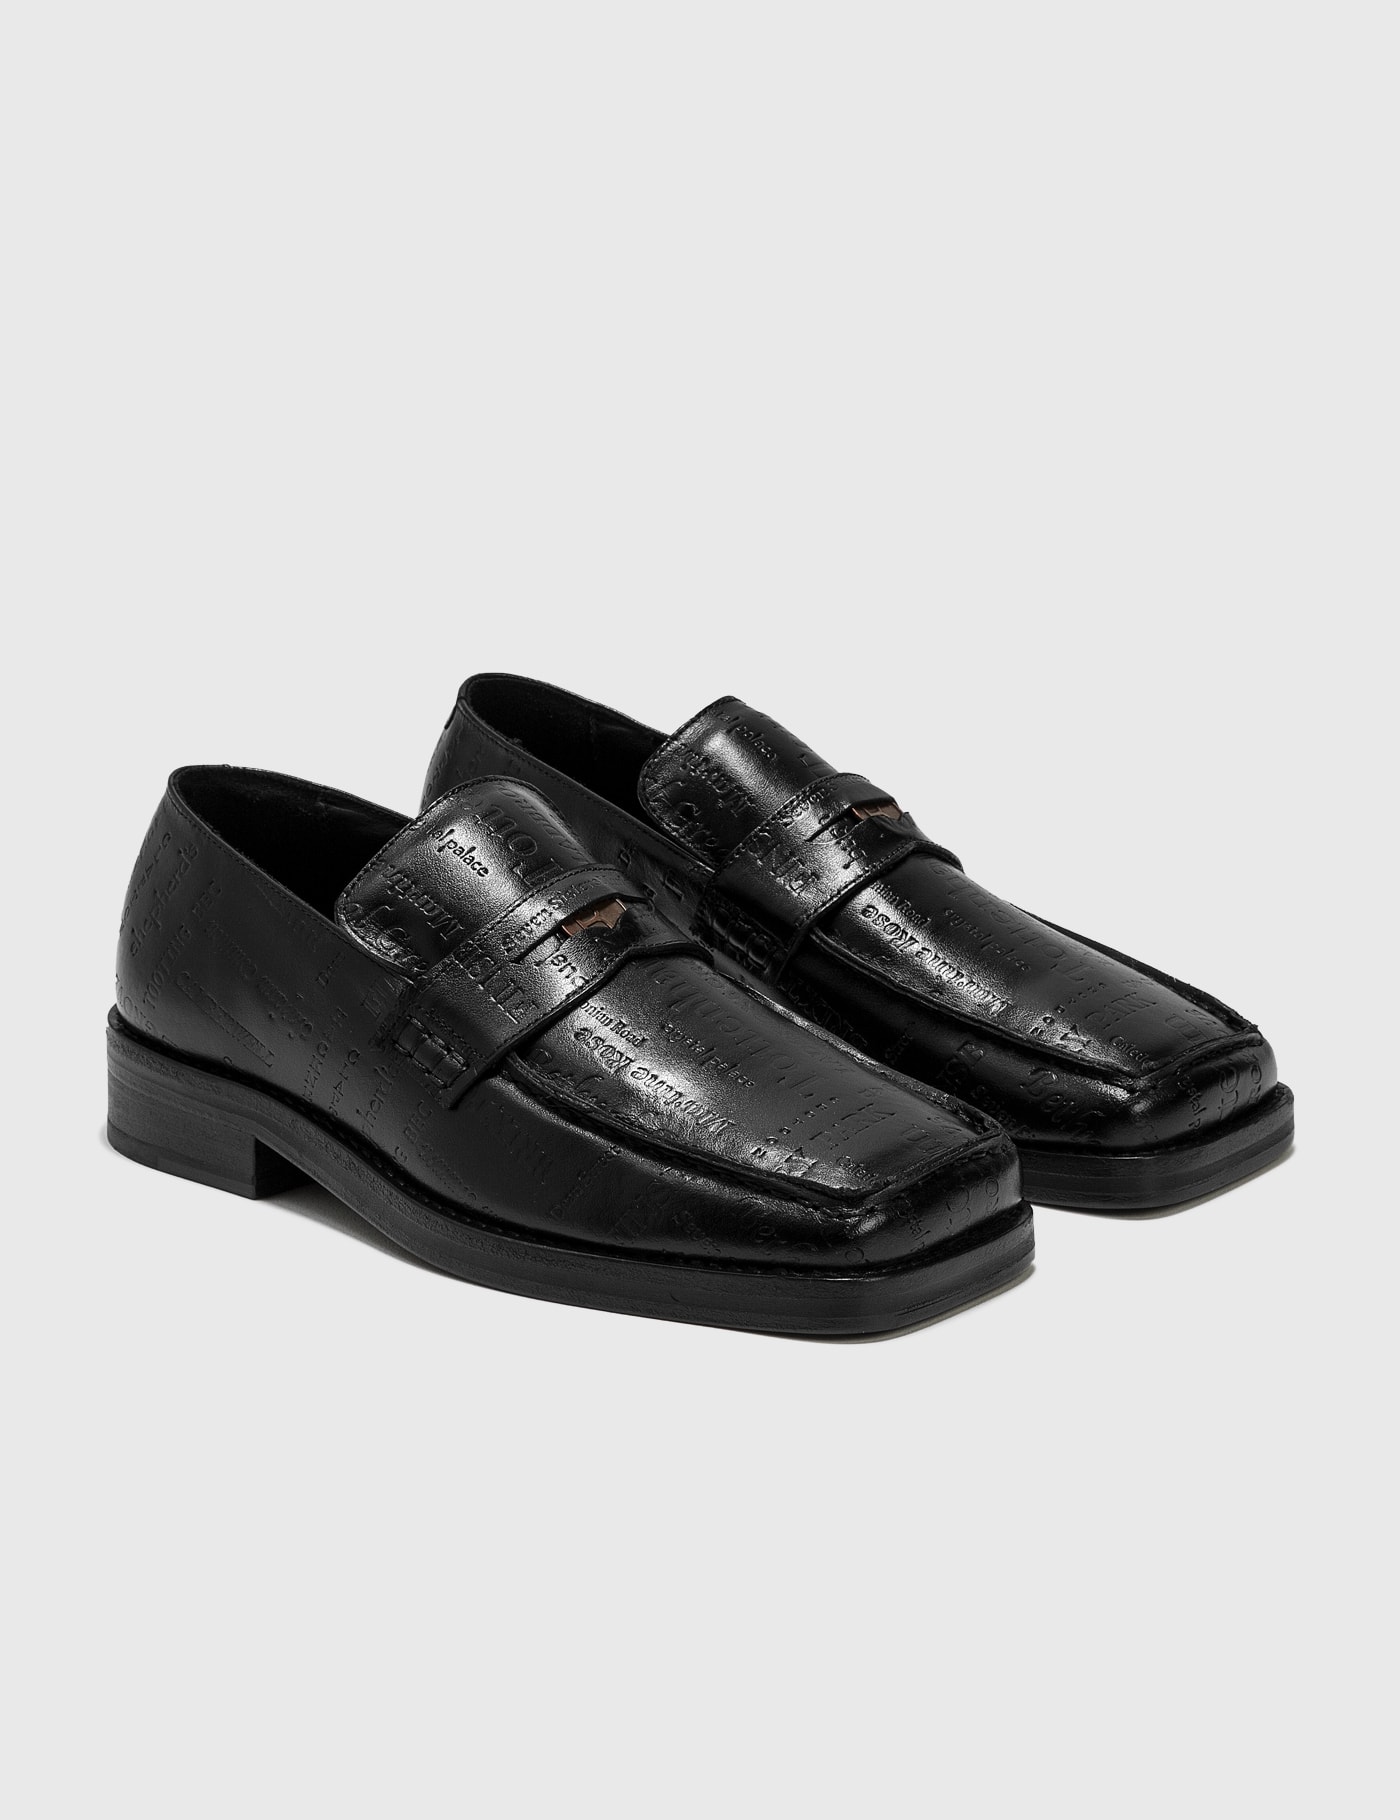 MARTINE ROSE EMBOSSED TEXT ROXY LOAFER